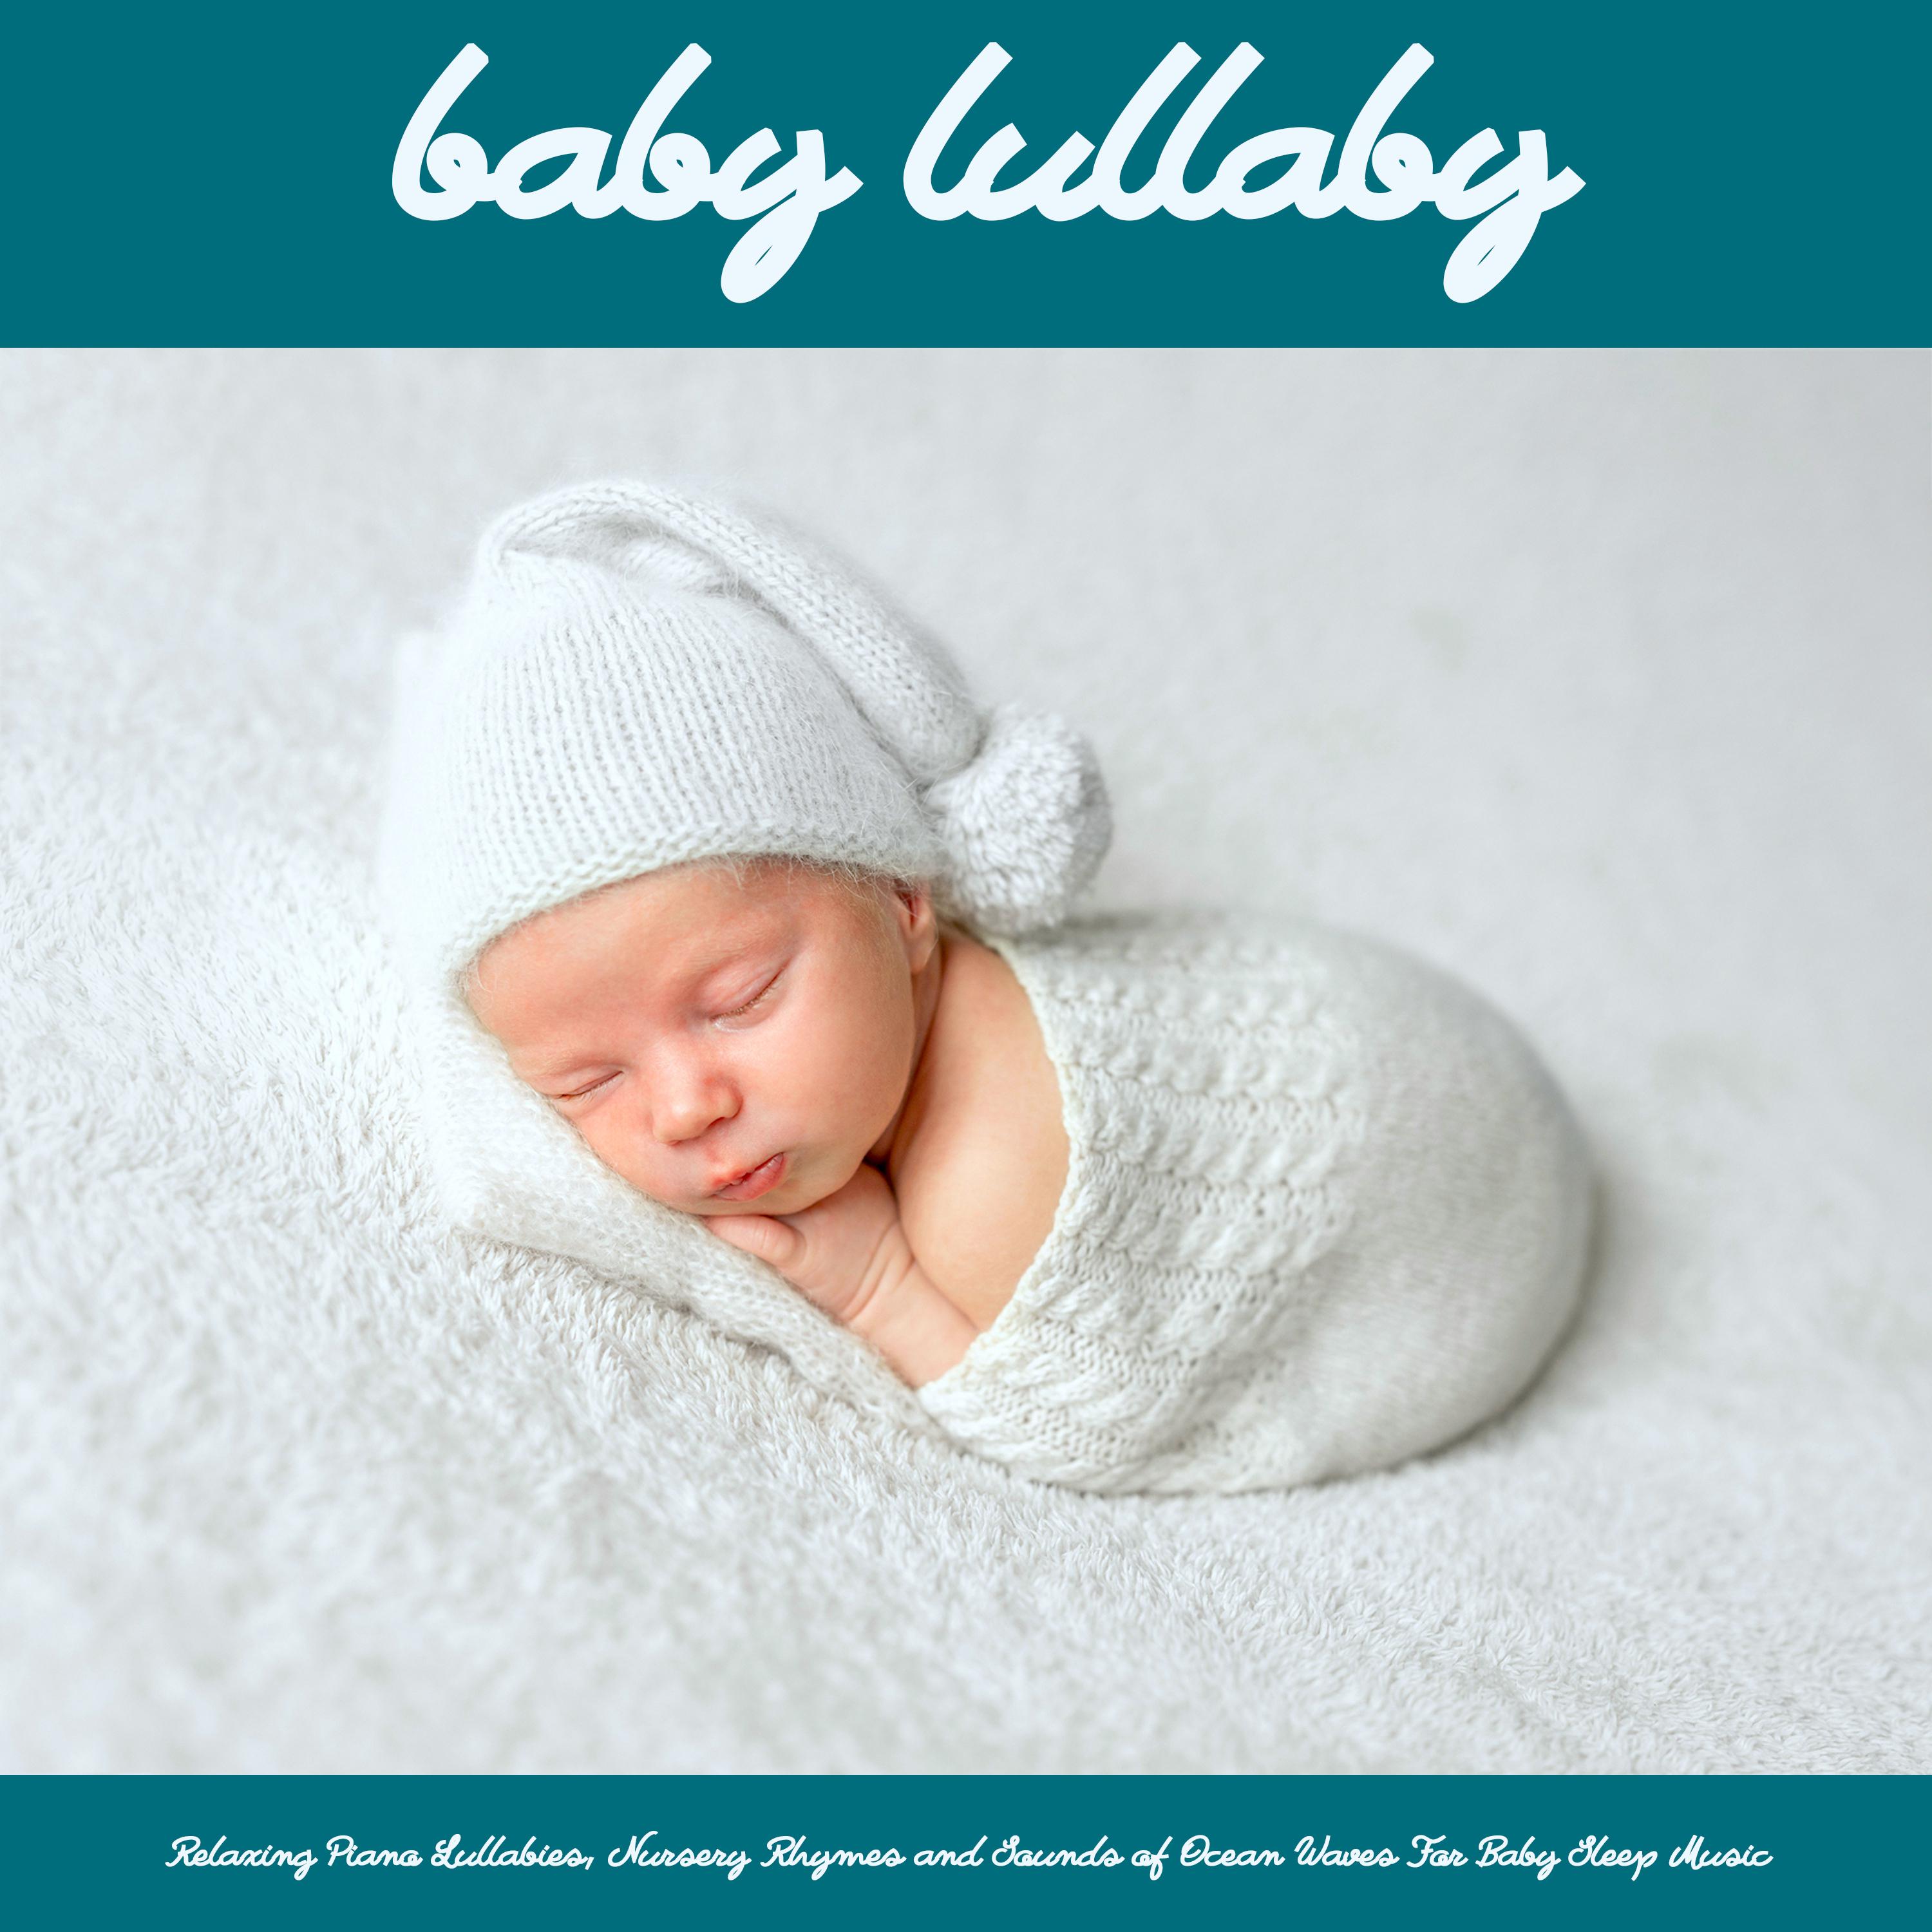 Baby Lullaby: Relaxing Piano Lullabies, Nursery Rhymes and Sounds of Ocean Waves For Baby Sleep Music